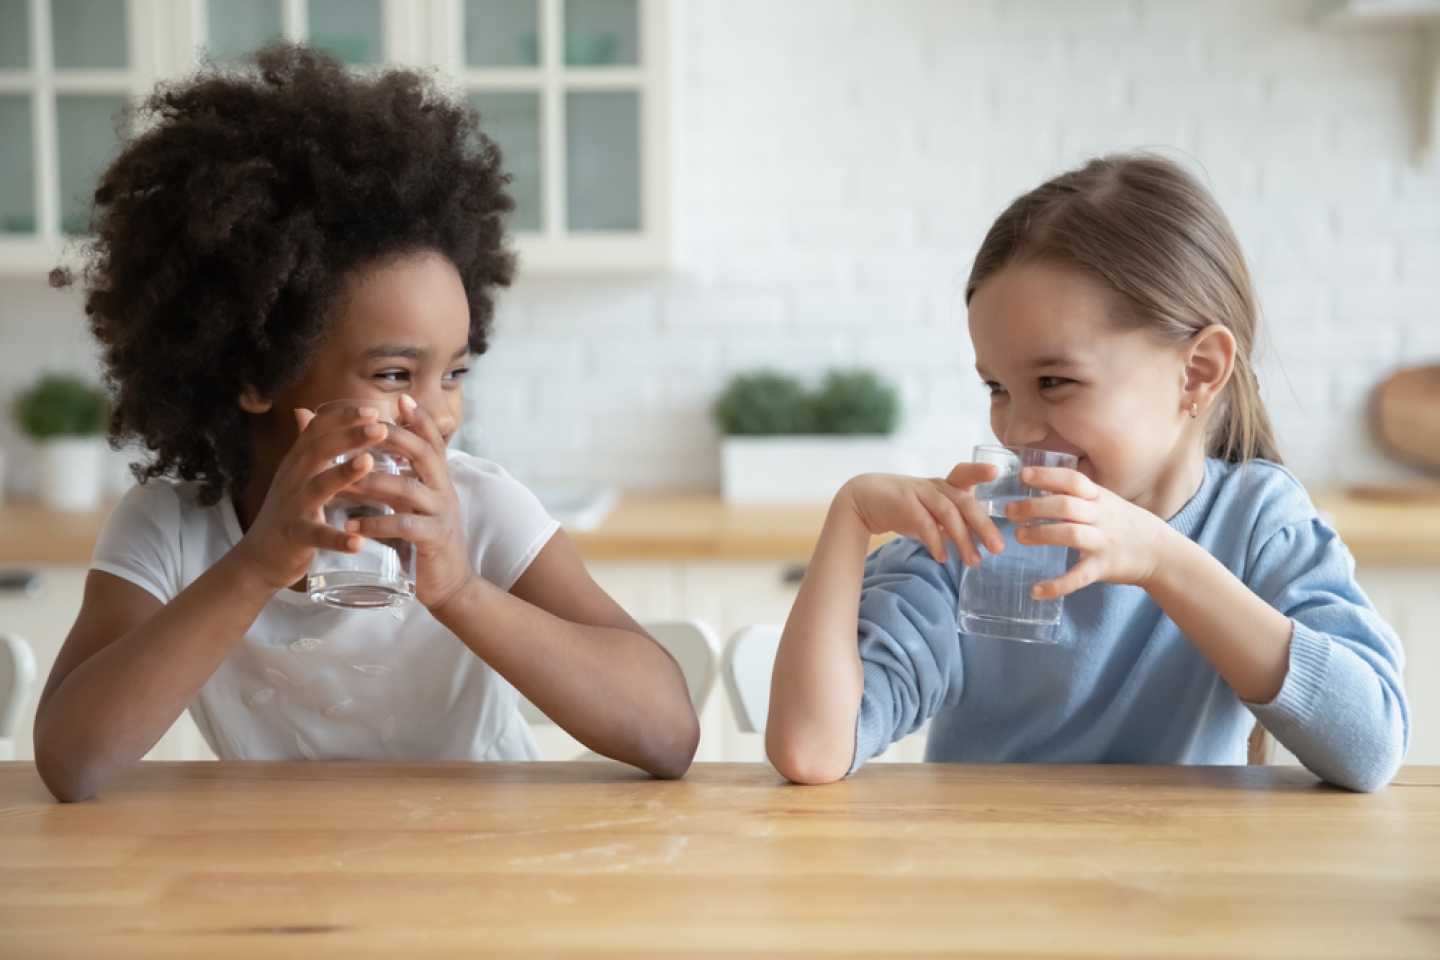 Cute smiling diverse little girls drinking fresh water, sitting at wooden table in kitchen, looking at each other, multiracial sisters adorable kids enjoying aqua, refreshment concept